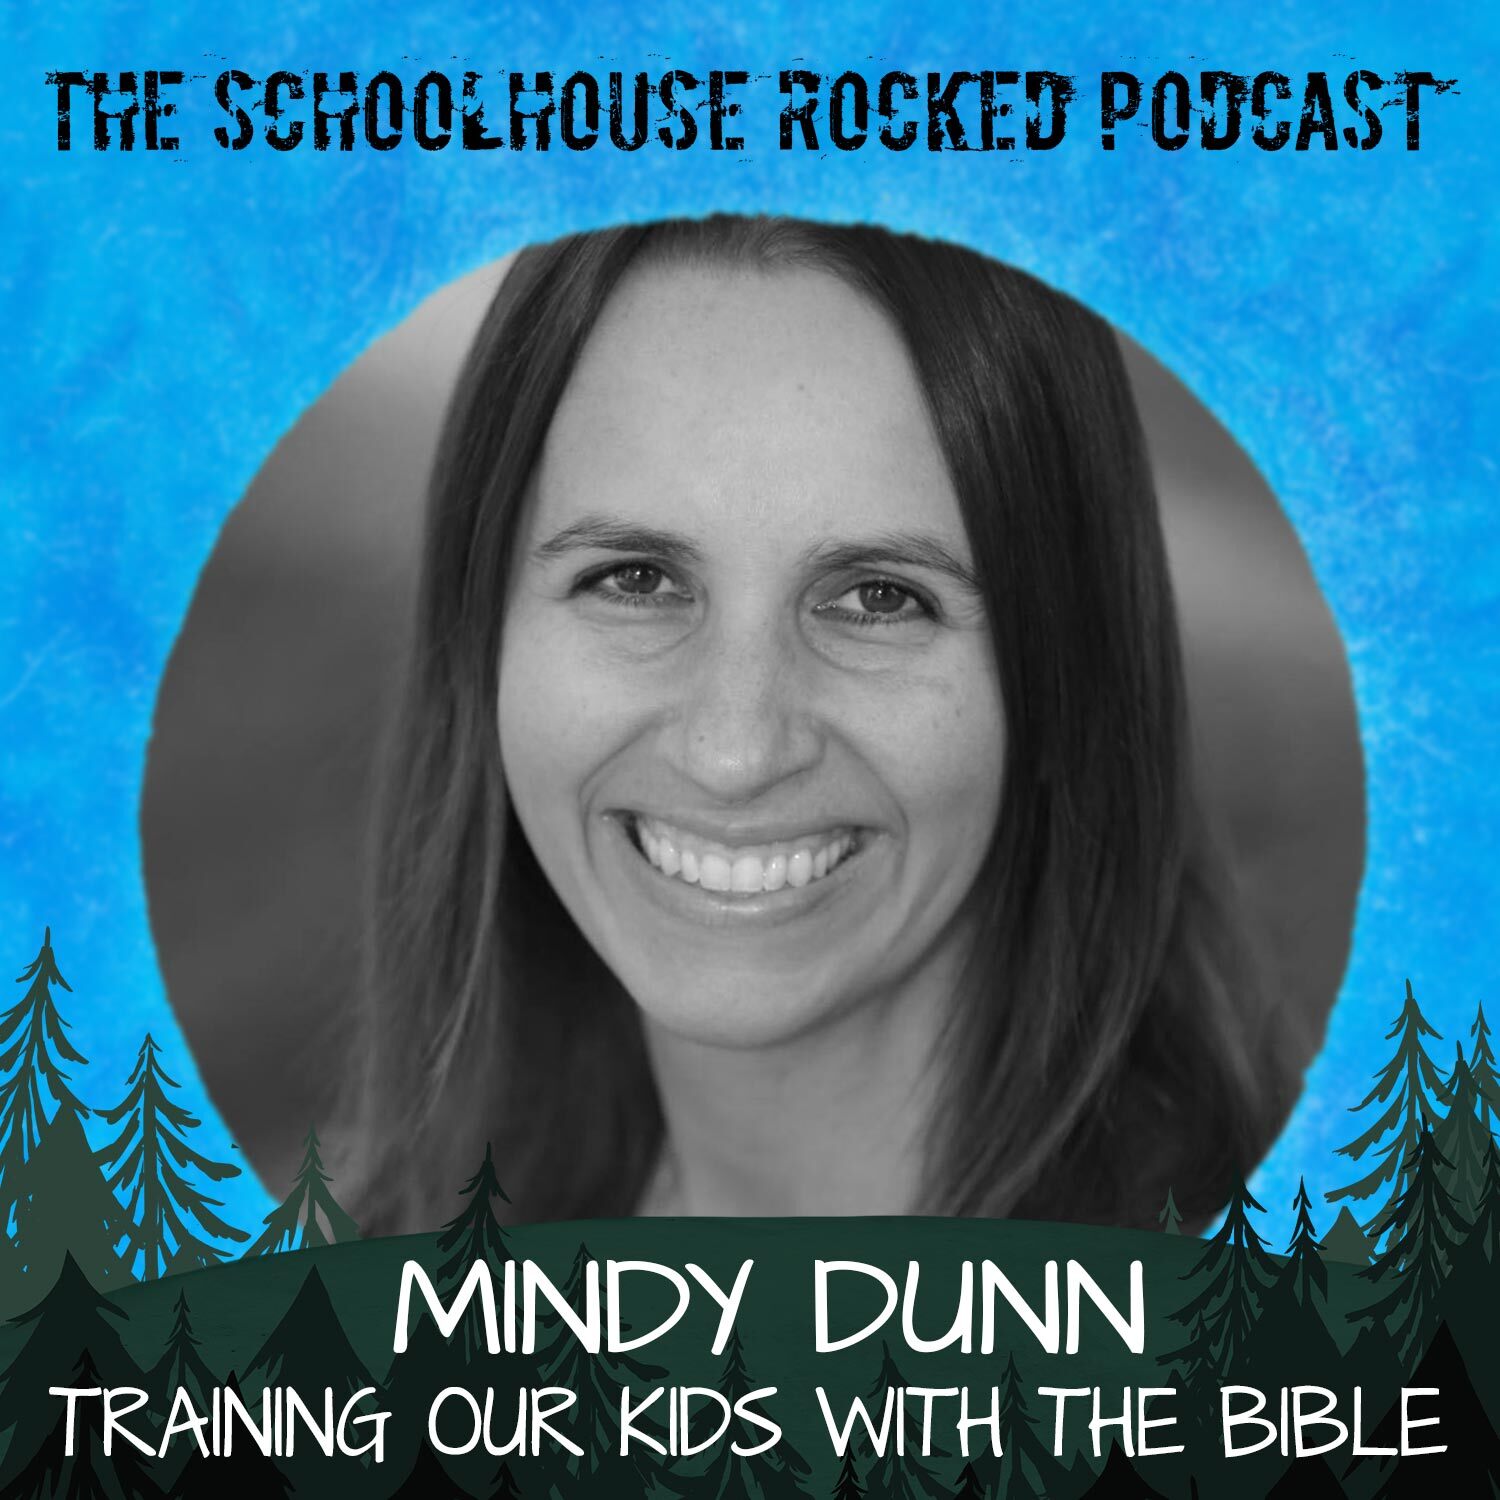 Mindy Dunn, Author of the Child Training Bible